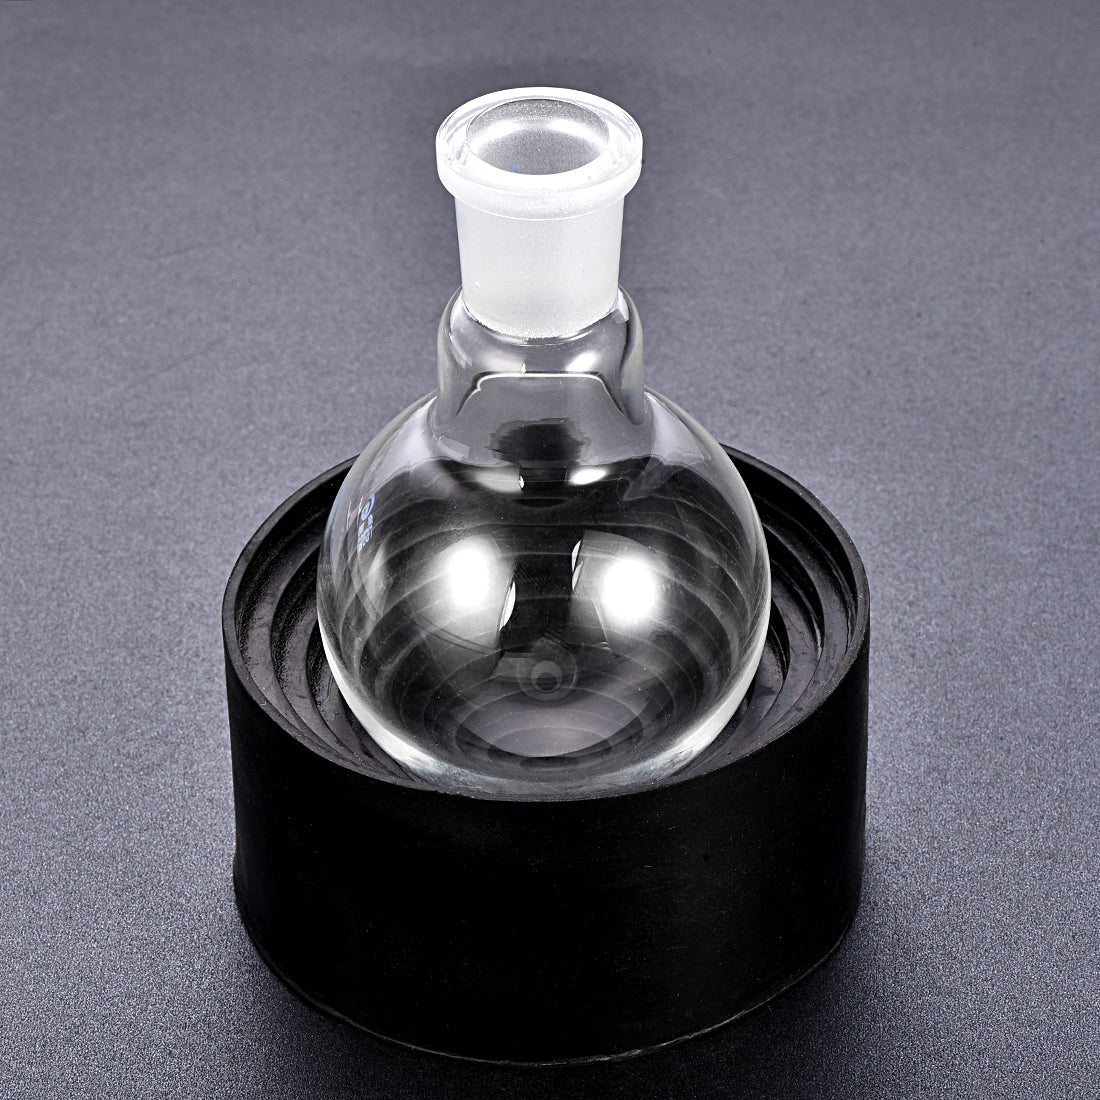 uxcell Uxcell Lab Flask Support Rubber Stand 90mm Diameter Round Bottom Holder for 50ml-1000ml Flasks Black 2Pcs